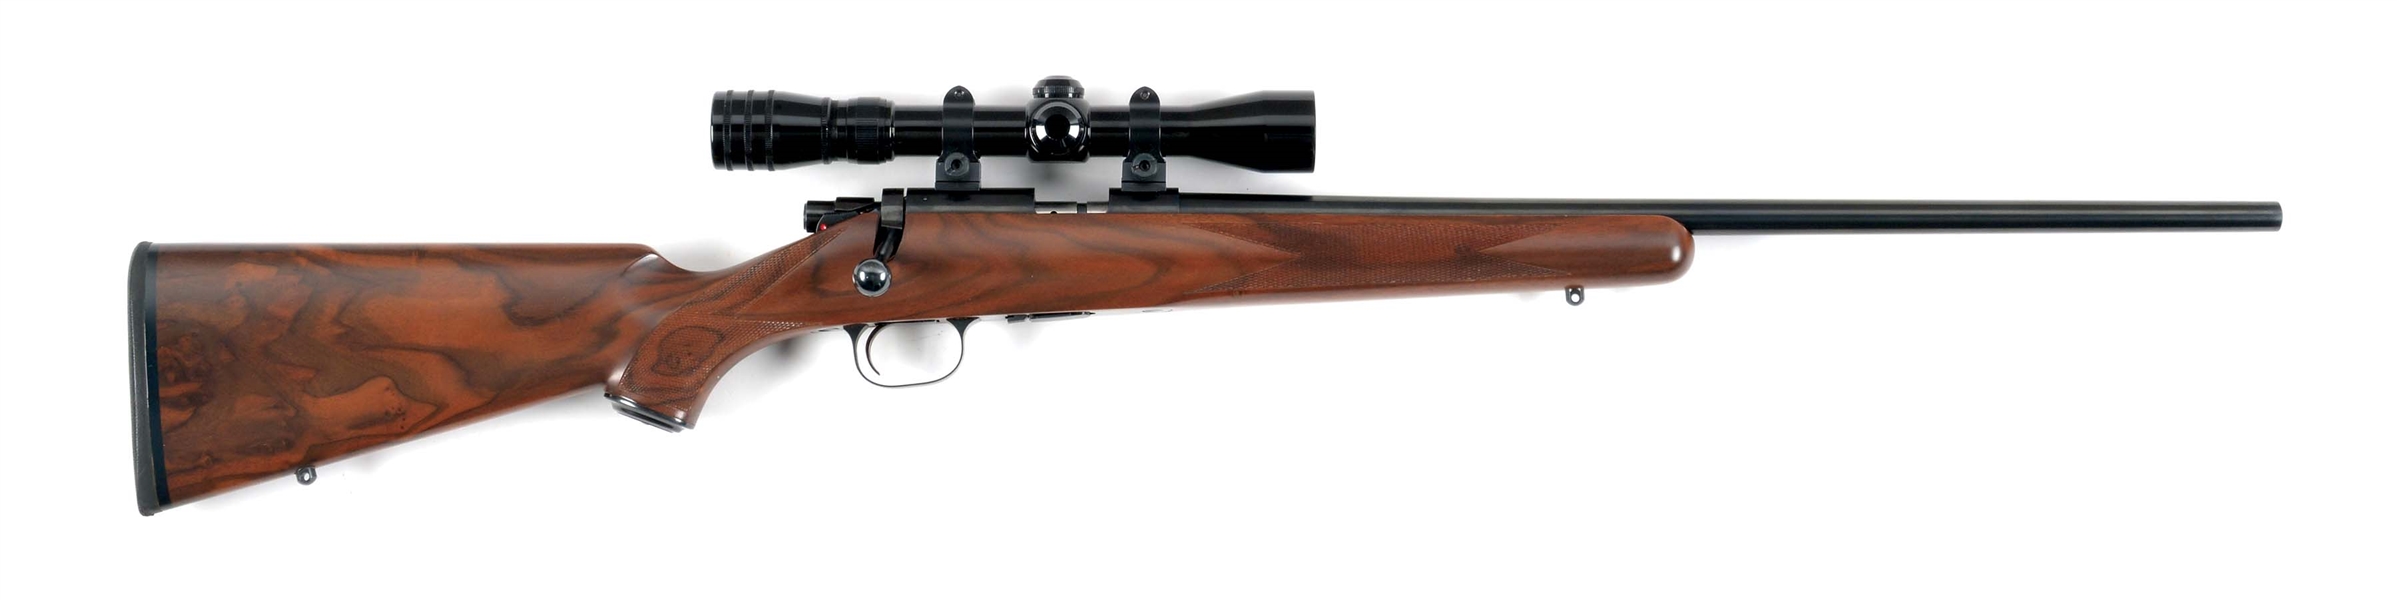 (M) KIMBER MODEL 82C .22 LR BOLT ACTION RIFLE WITH SCOPE.